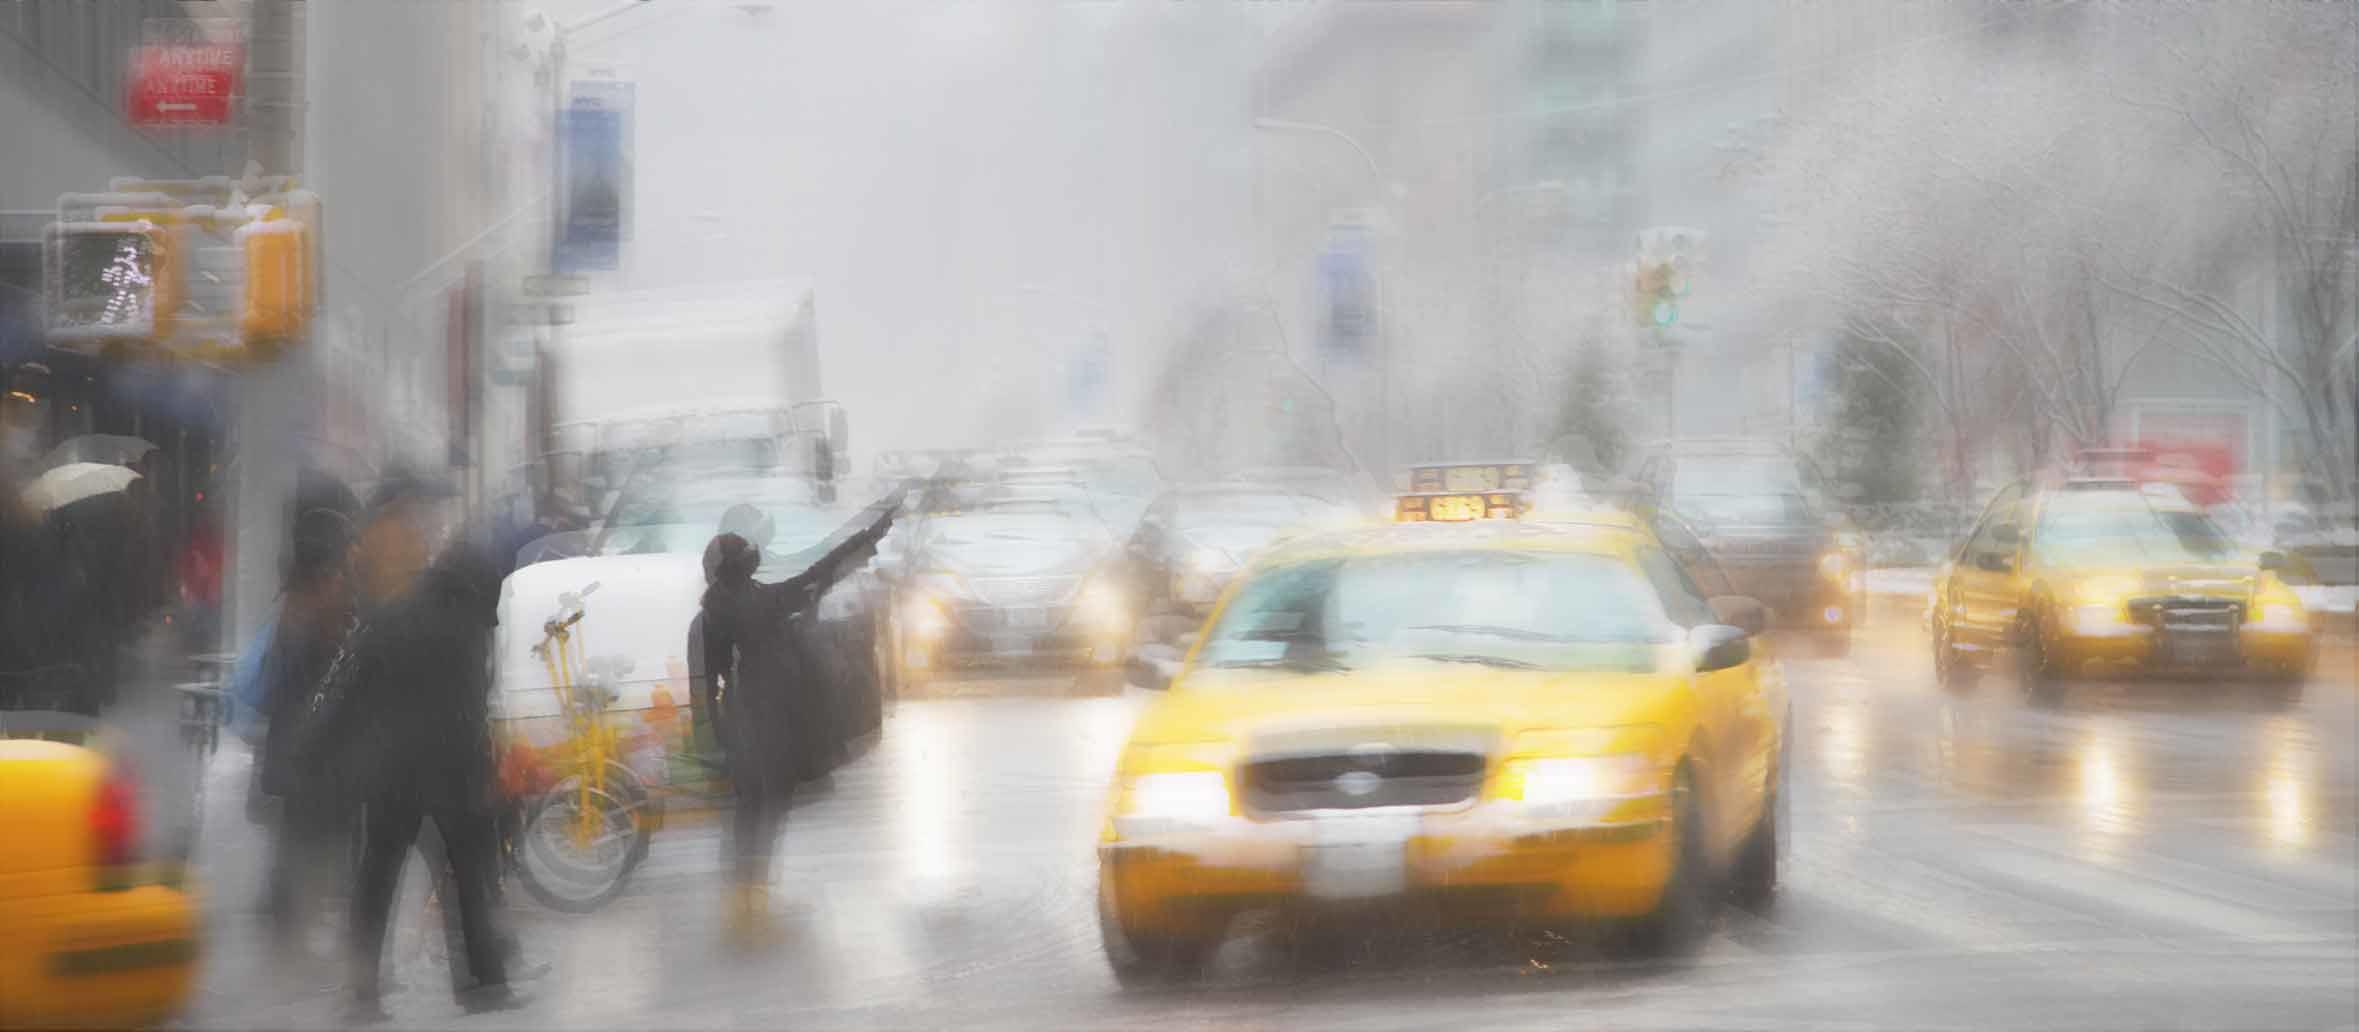 A rainy and busy day in the city blurred to simulate vision with fogged over glasses versus lenses.